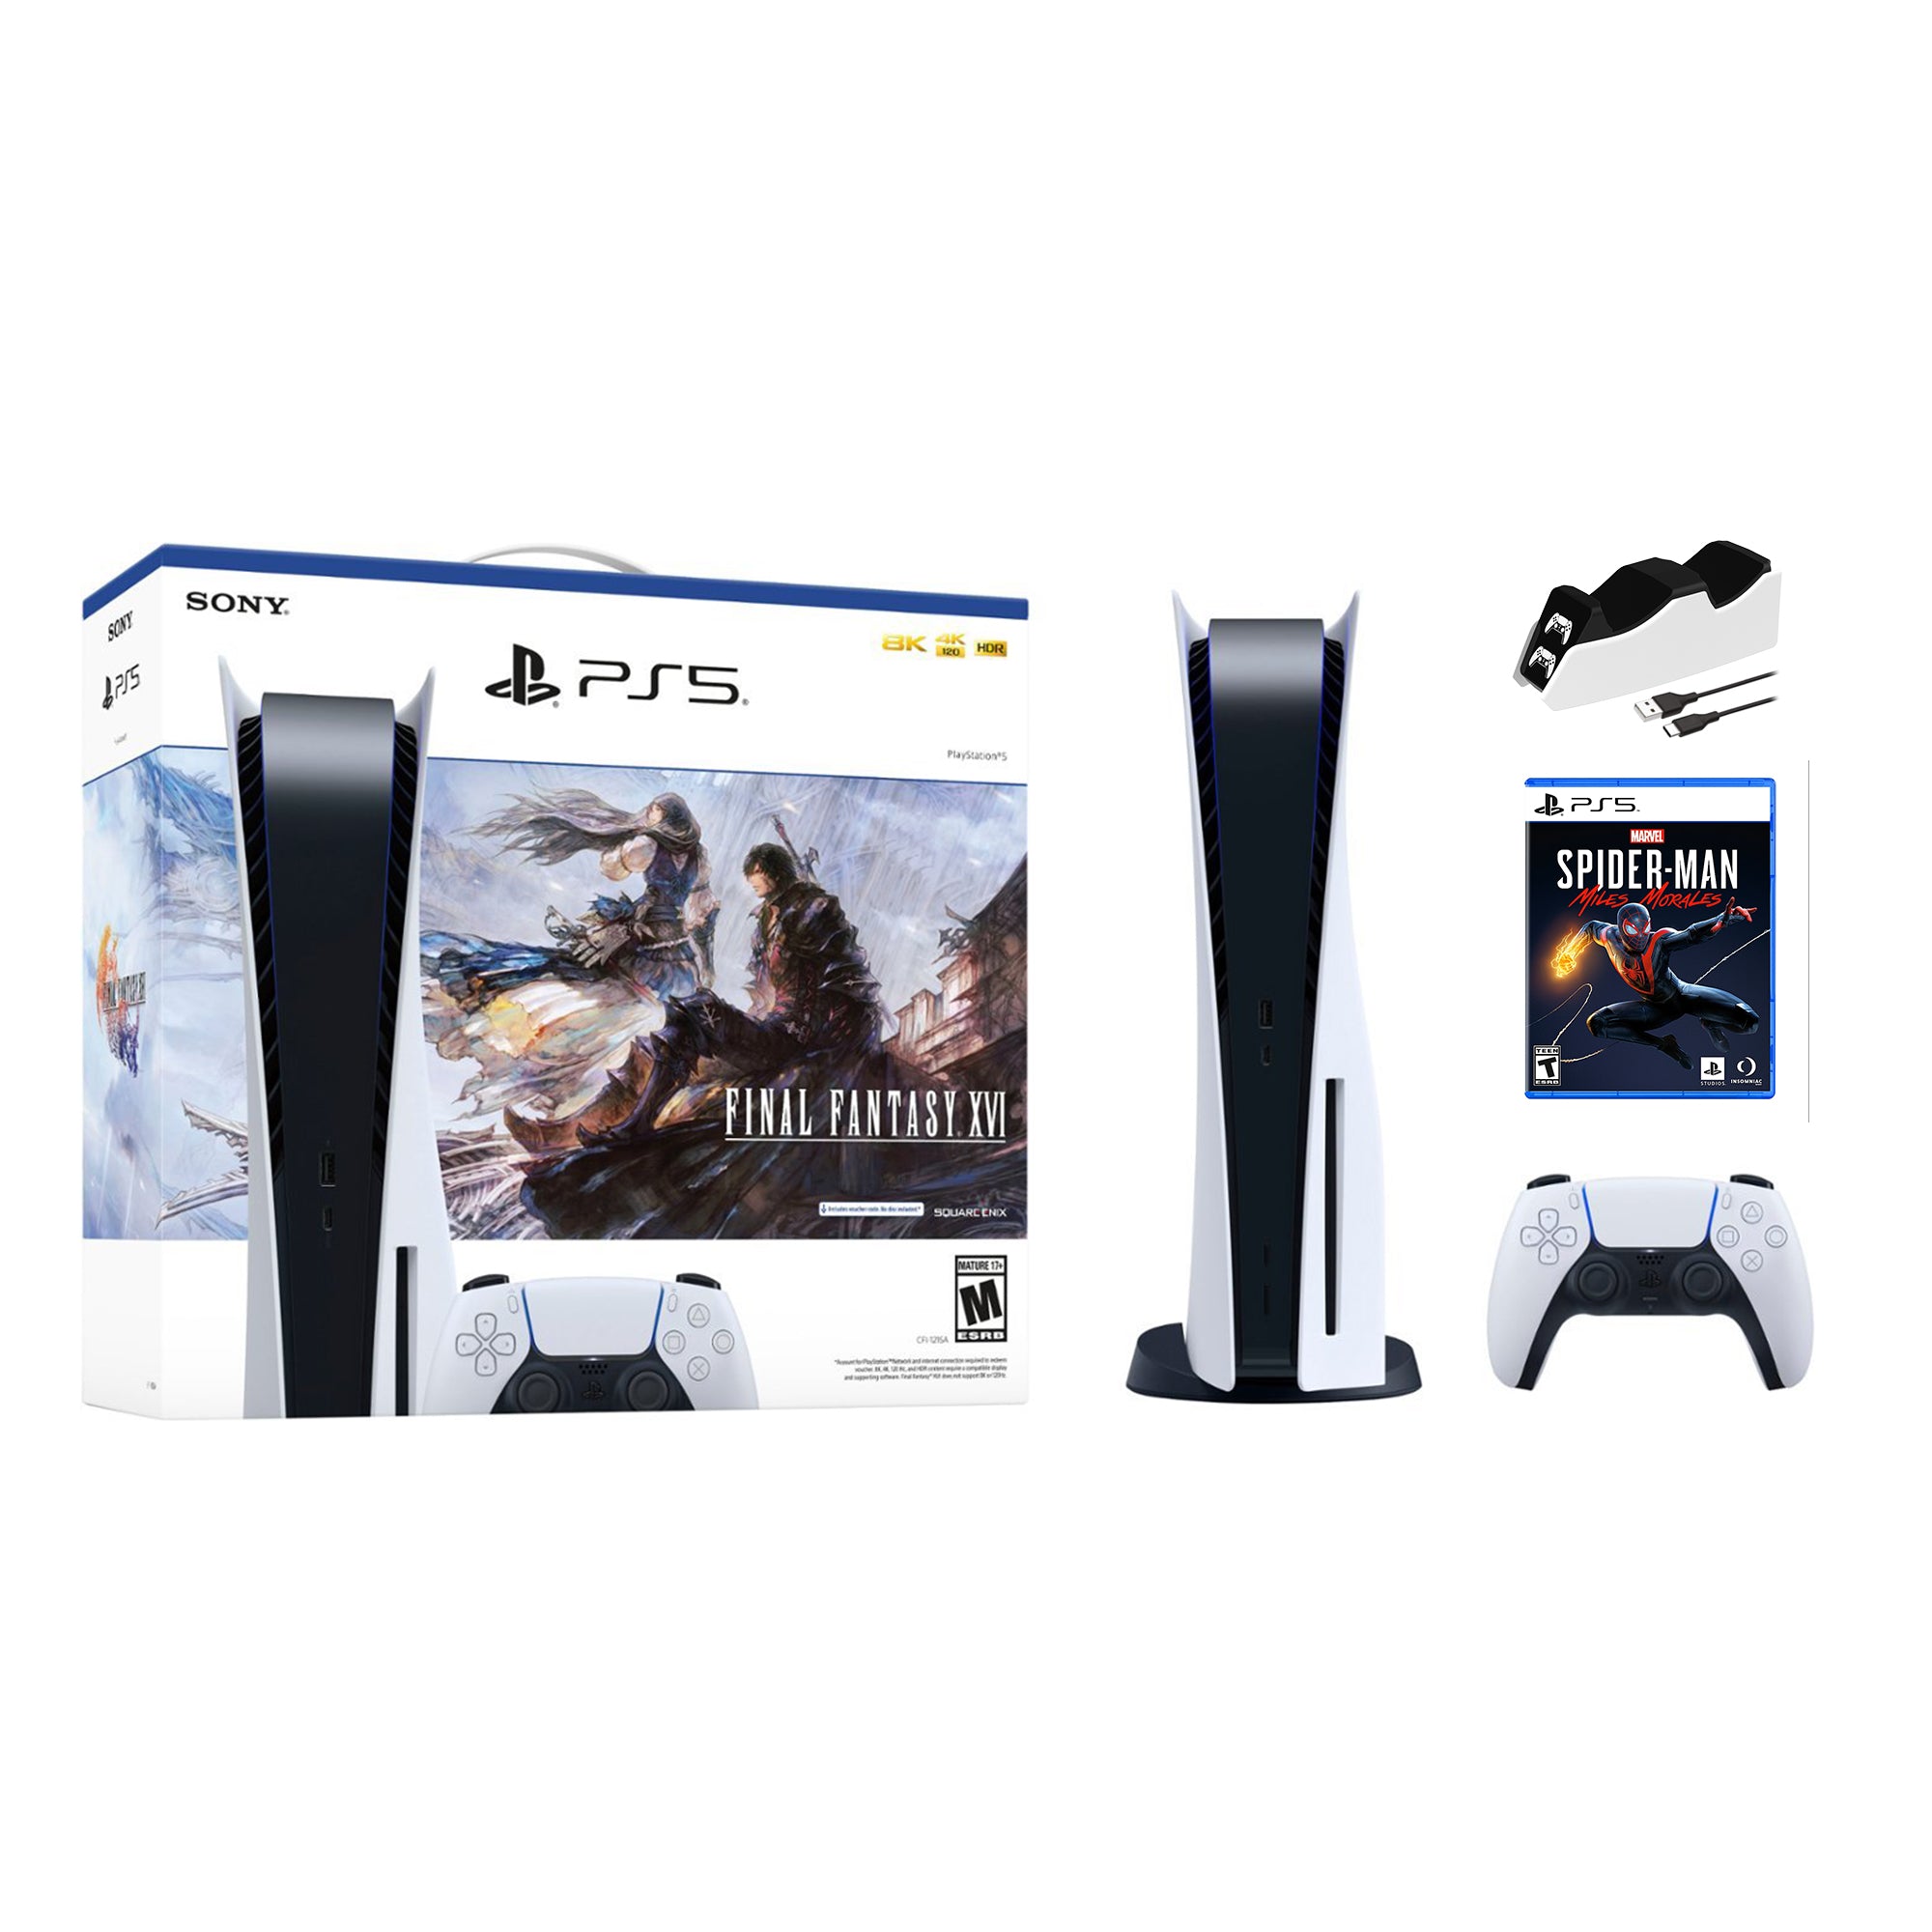 Playstation 5 Disc Edition FINAL FANTASY XVI Bundle with Spider-Man: Miles Morales and Mytrix Controller Charger - PS5, White